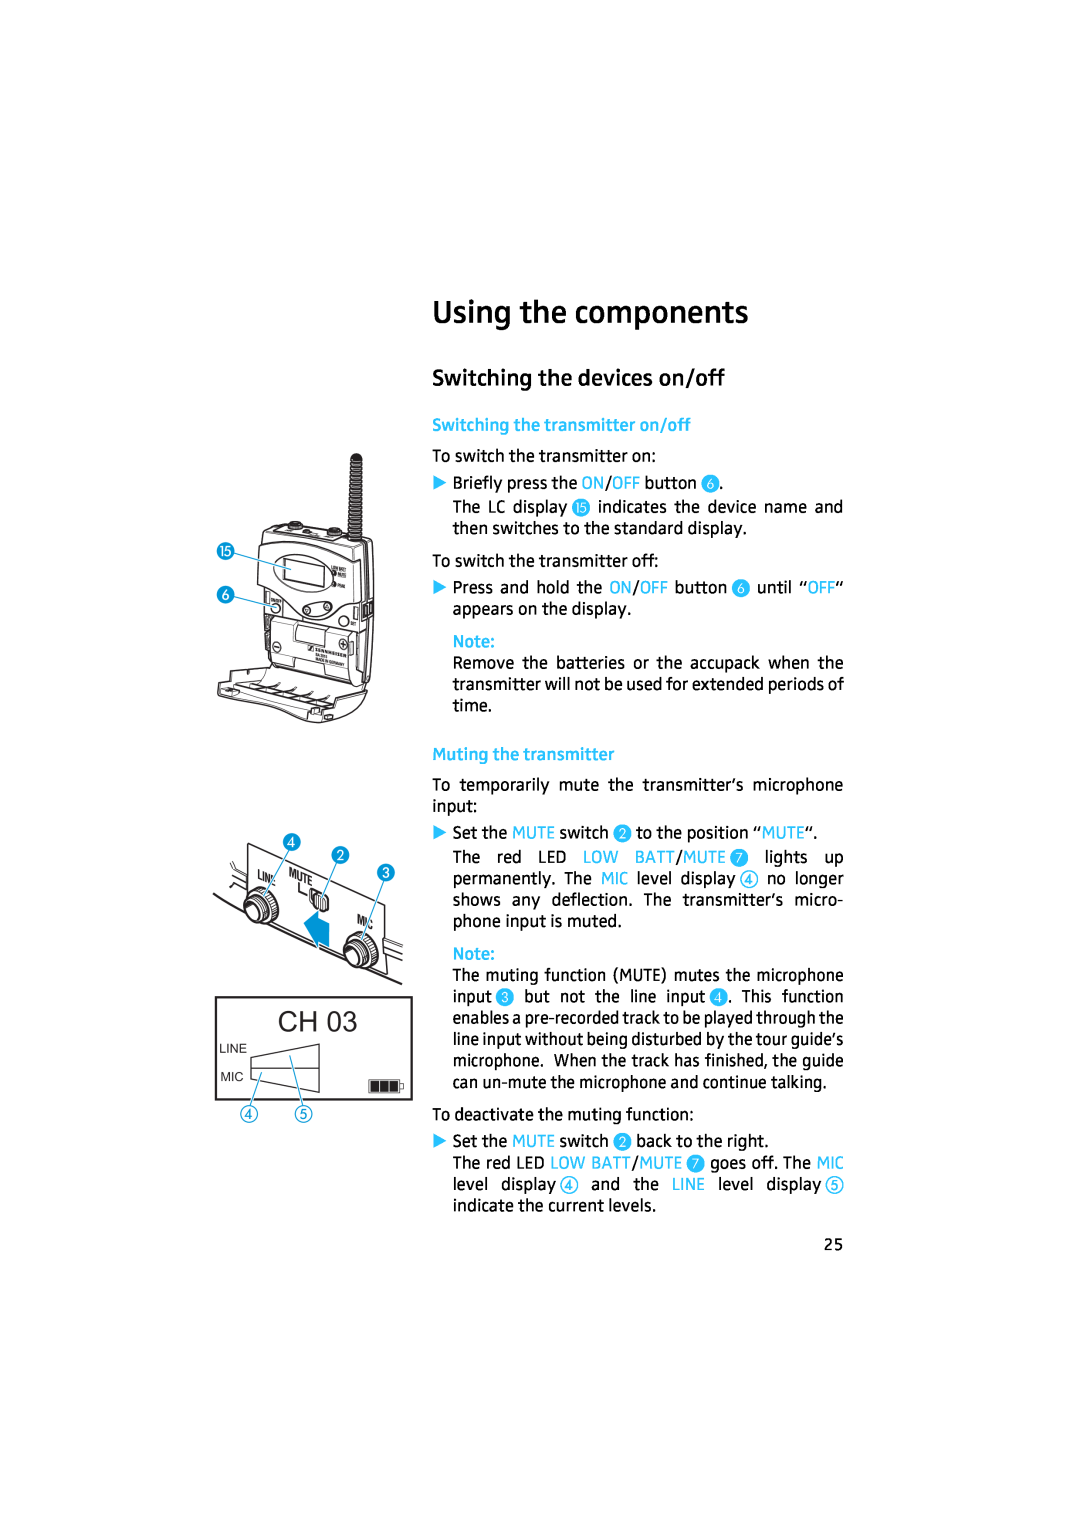 Sennheiser 2020 manual Using the components, Switching the devices on/off 